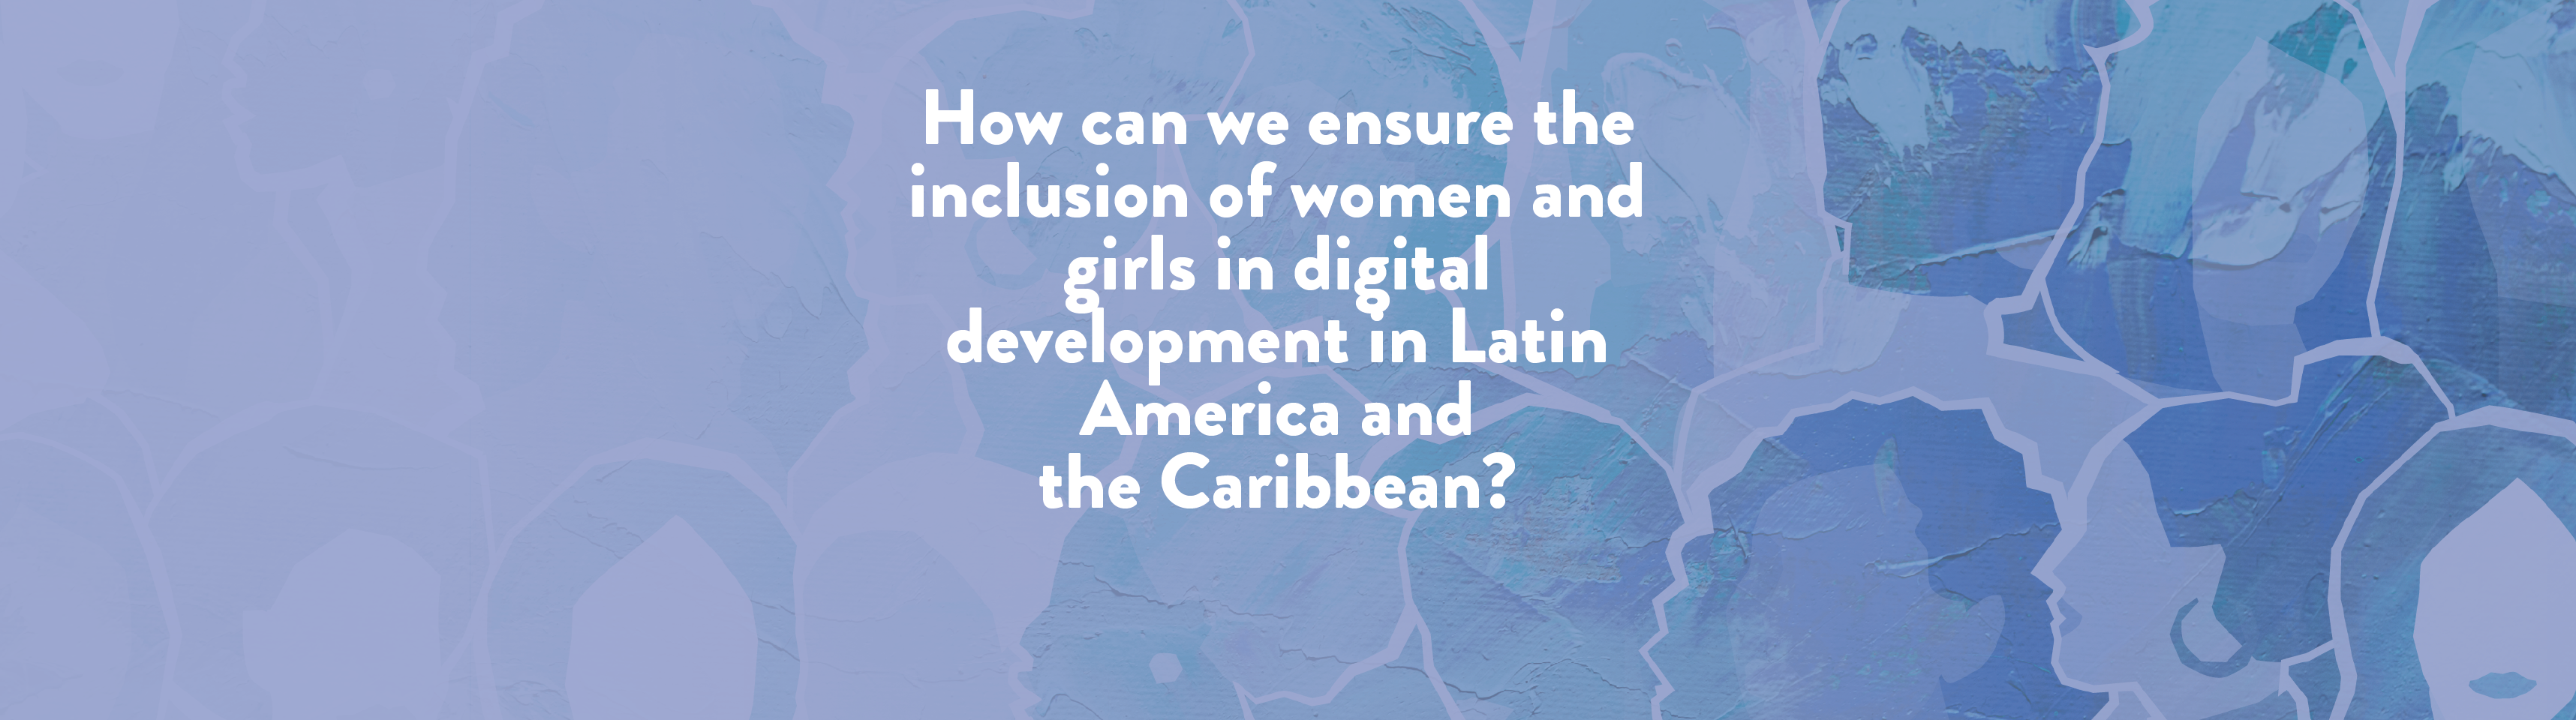 How can we ensure the inclusion of women and girls in digital development in Latin America and the Caribbean?